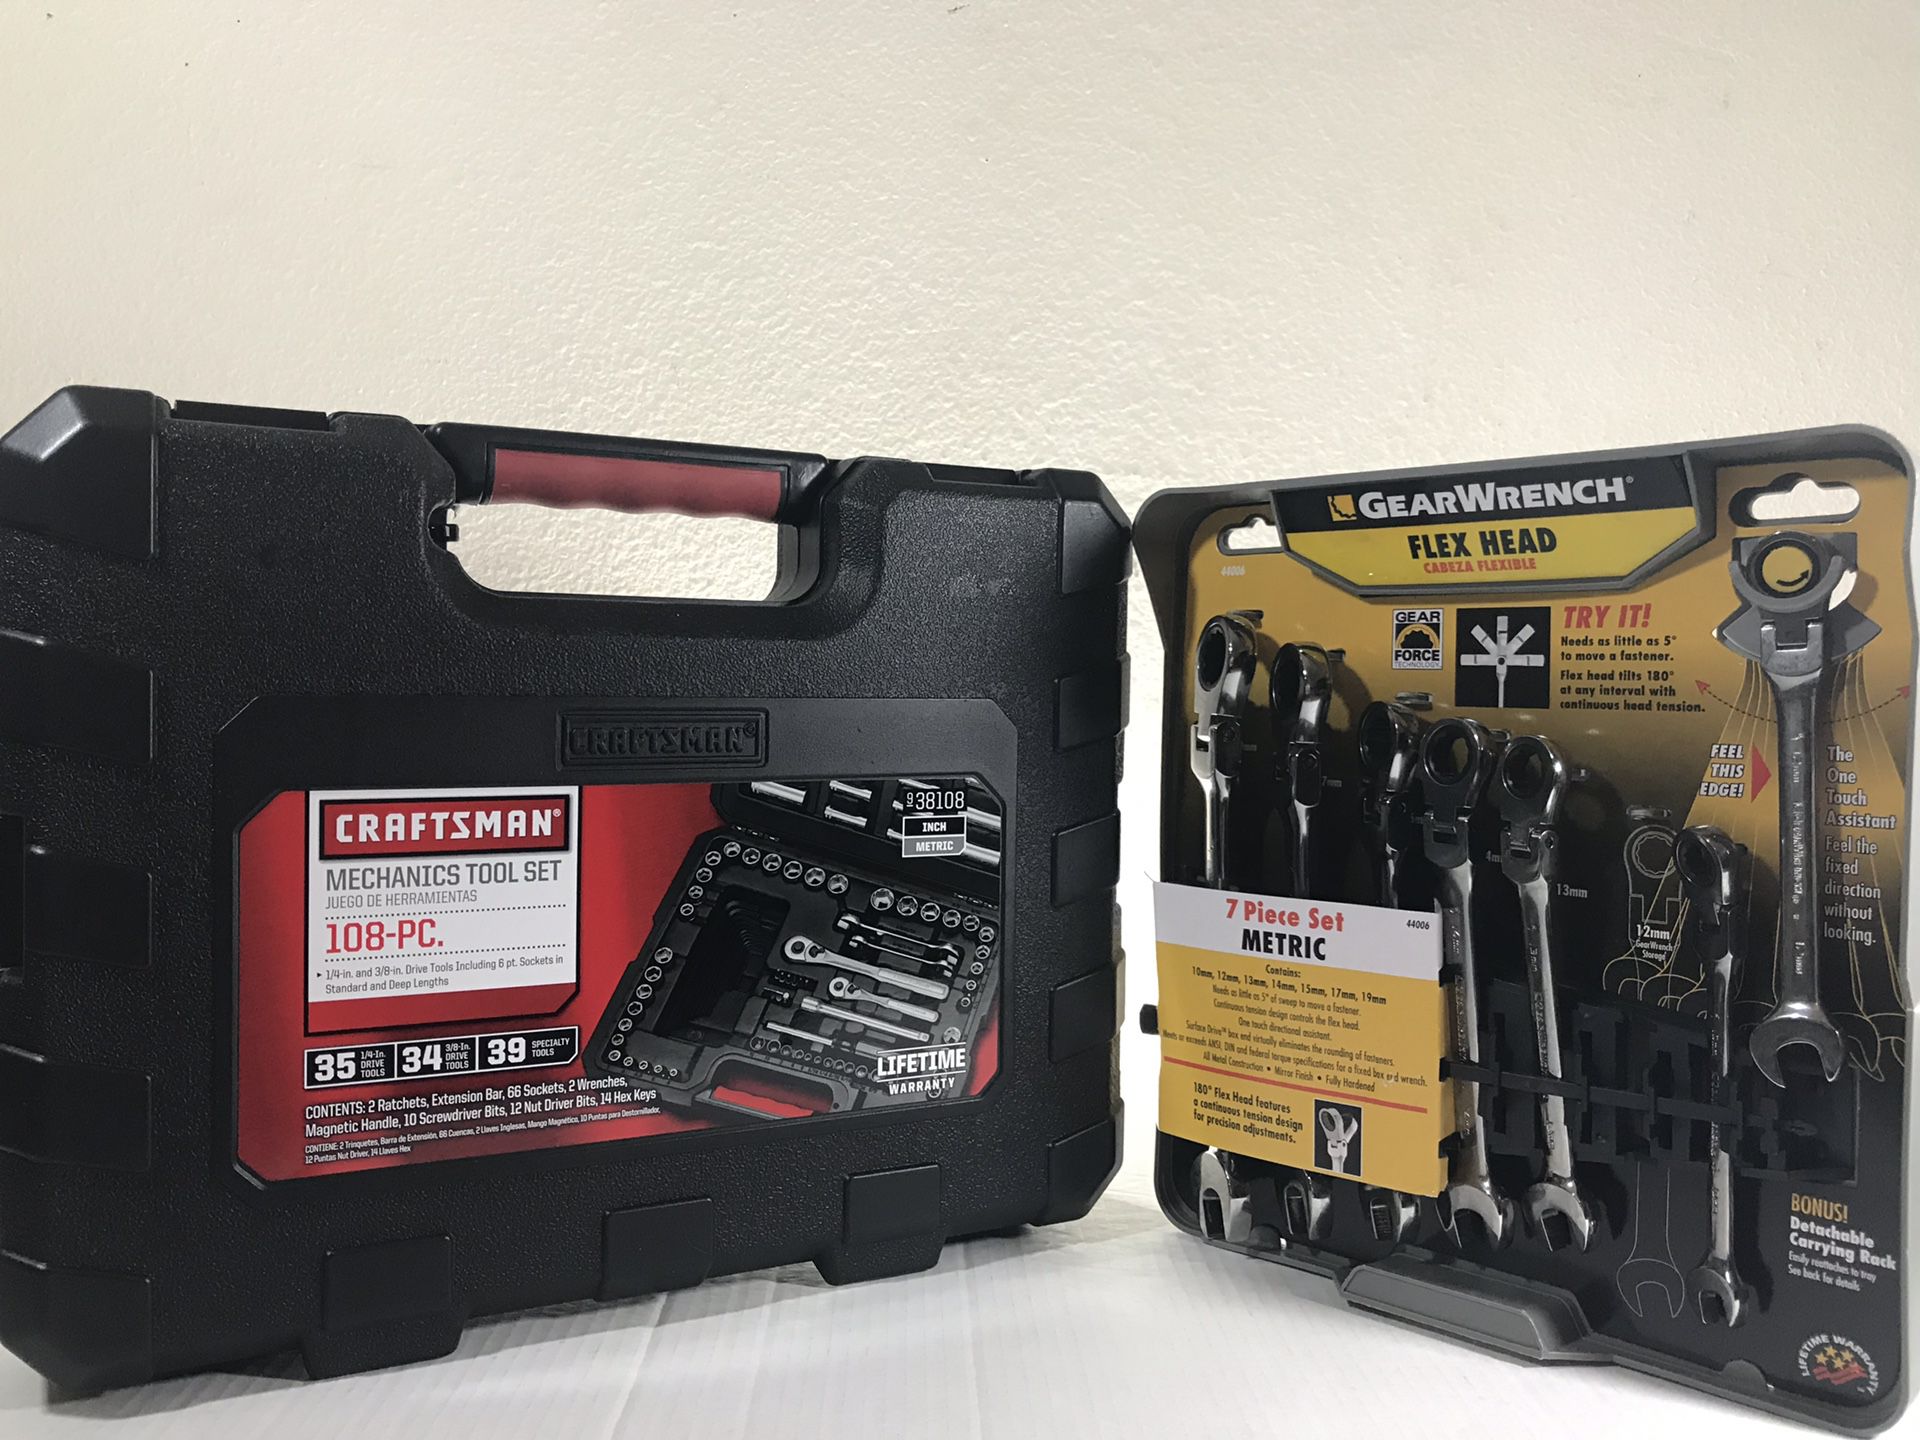 Craftsman and GearWrench tool sets